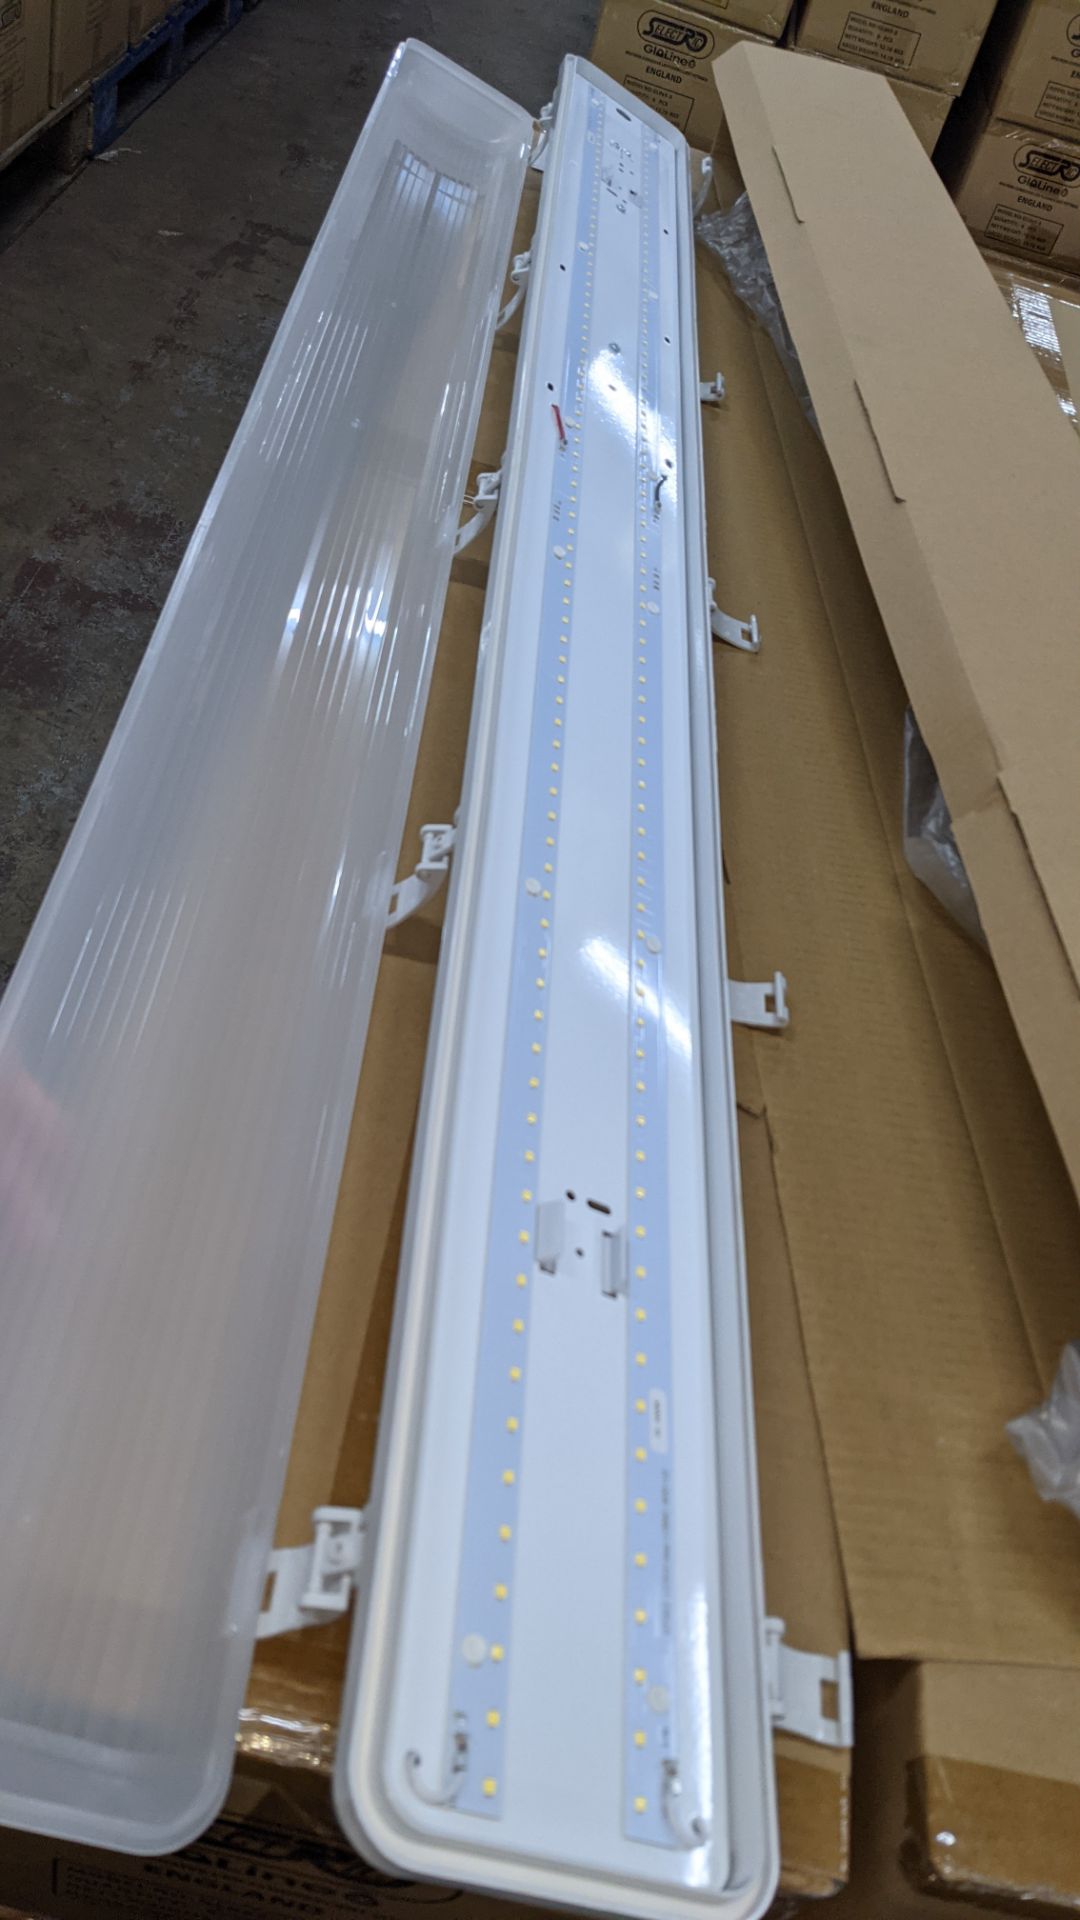 18 off IP65 non-corrosive LED fluorescent light fittings. Model GLO65-4, 4', twin LED 40W, polycarb - Image 5 of 6